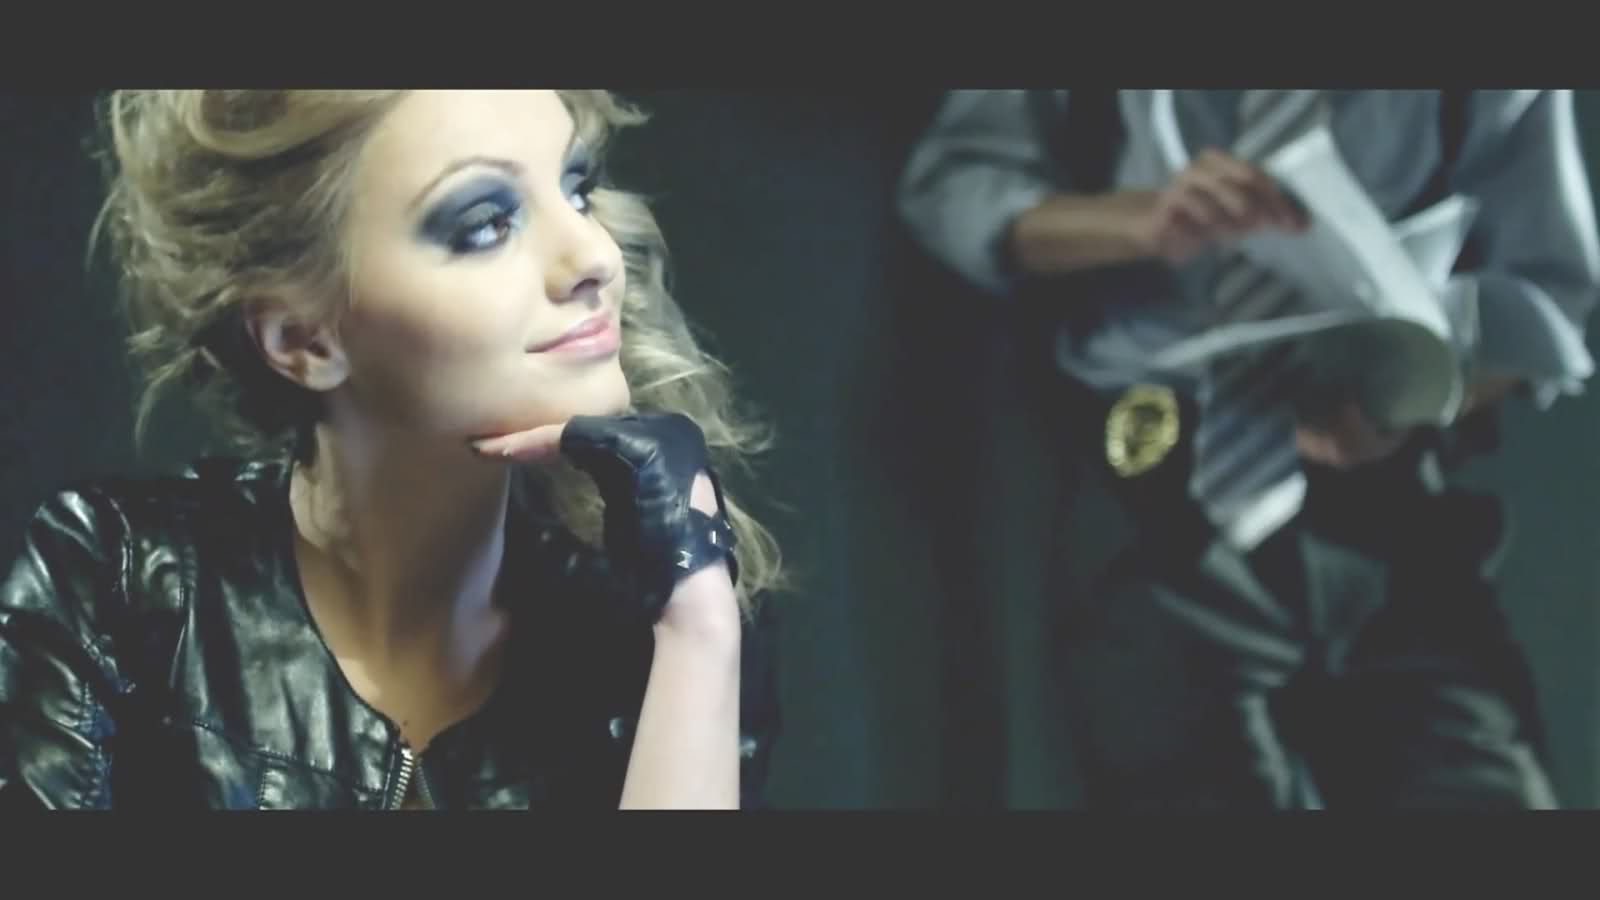 Images/Picture Alexandra Stan Mr. Saxo Beat in Concert 2011 ~ Song Lyrics Update